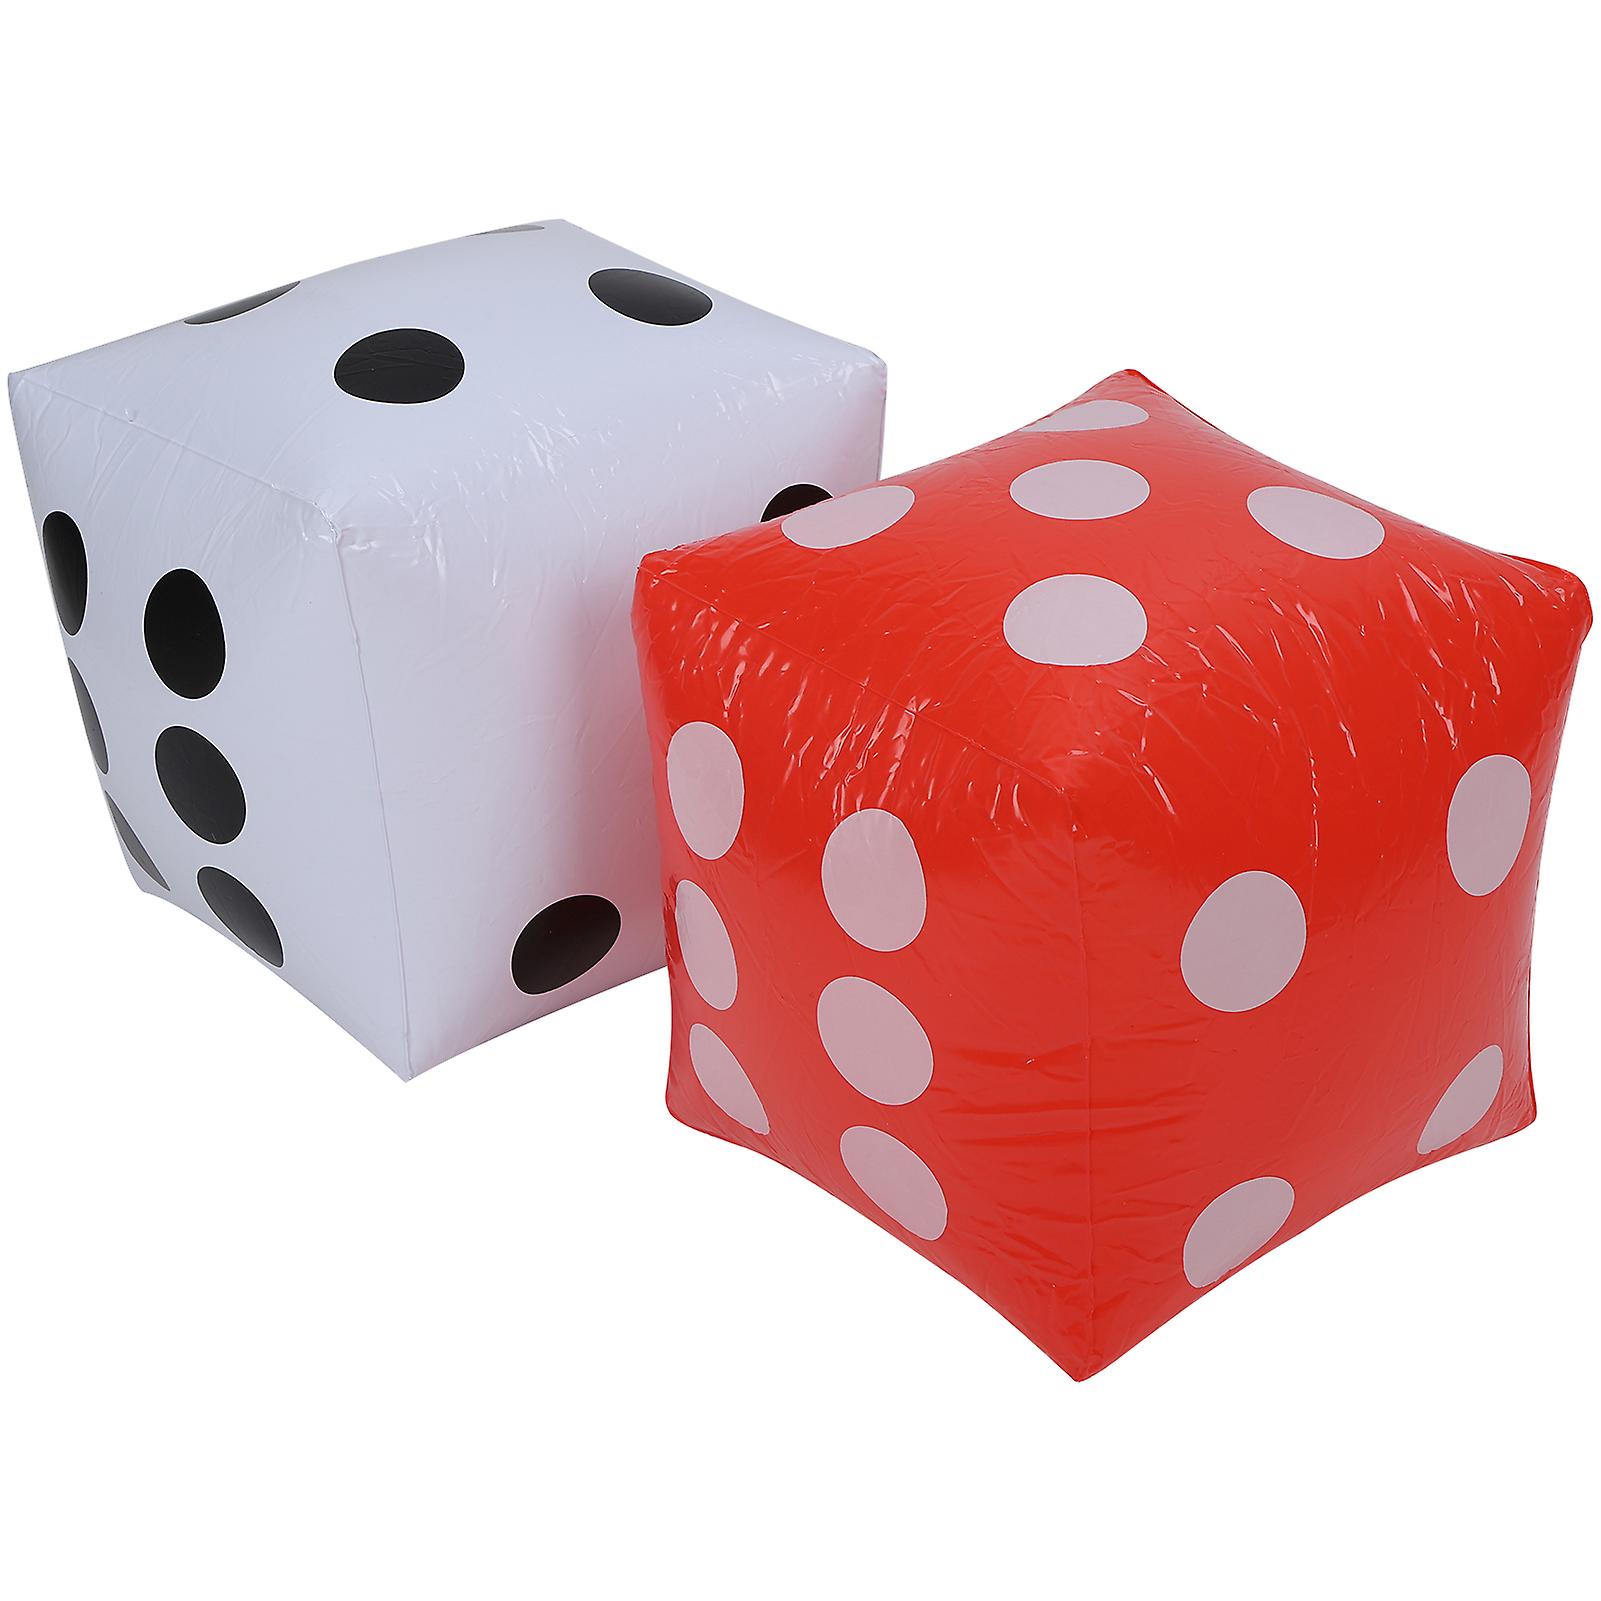 Dice Balloon Party Outdoor Toy Pvc Inflatable Education Craft Supplies Red White